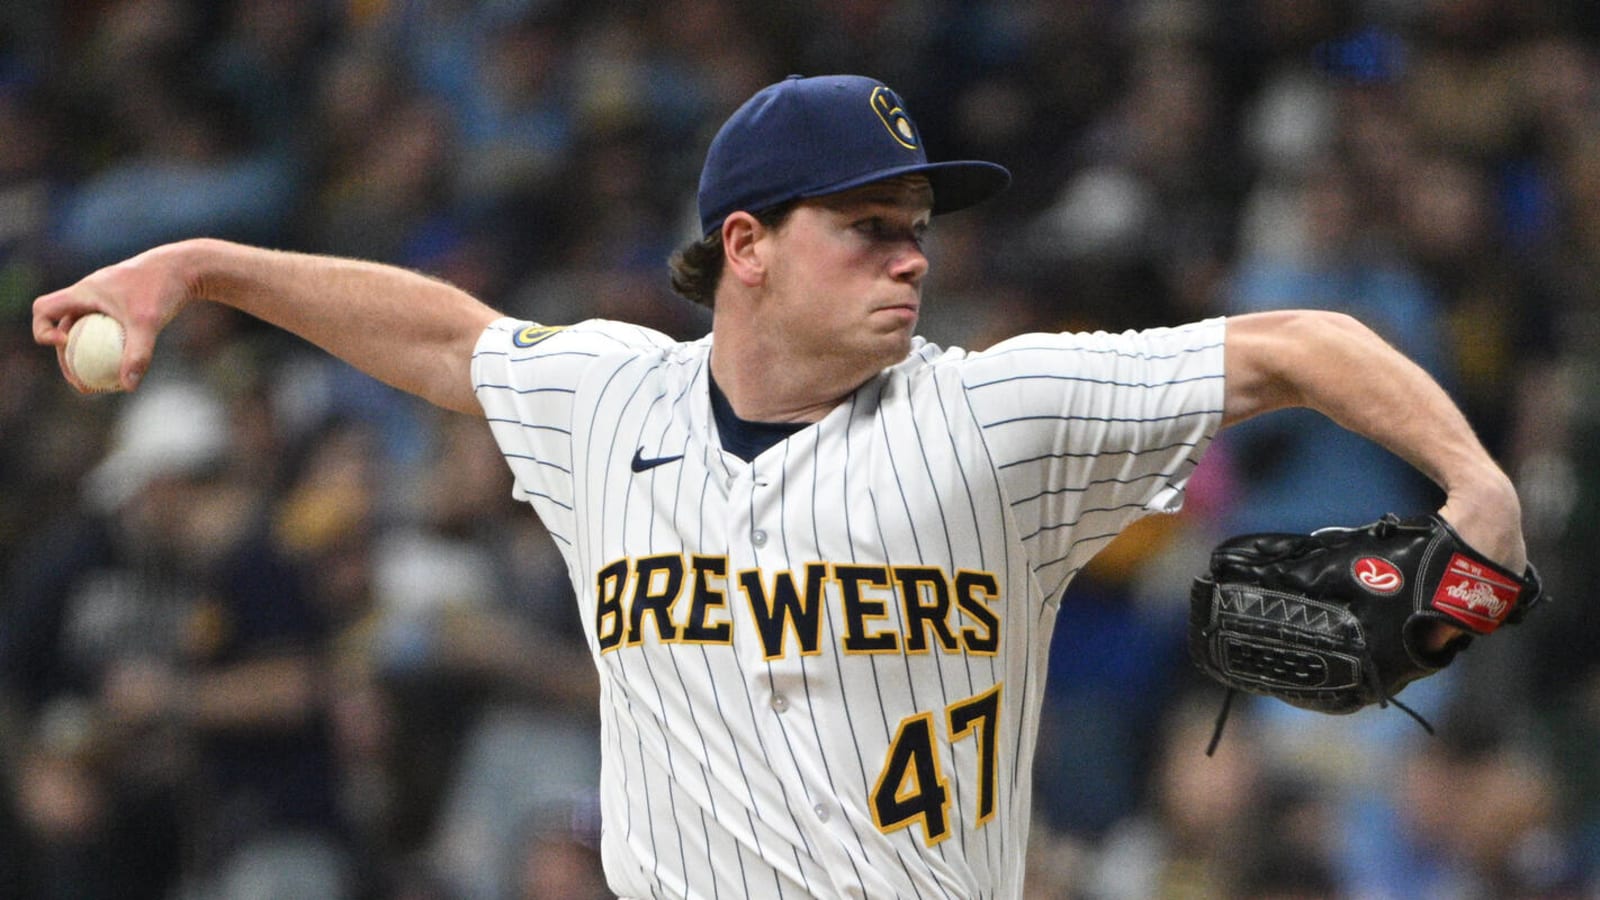 Brewers reliever set for rehab appearances